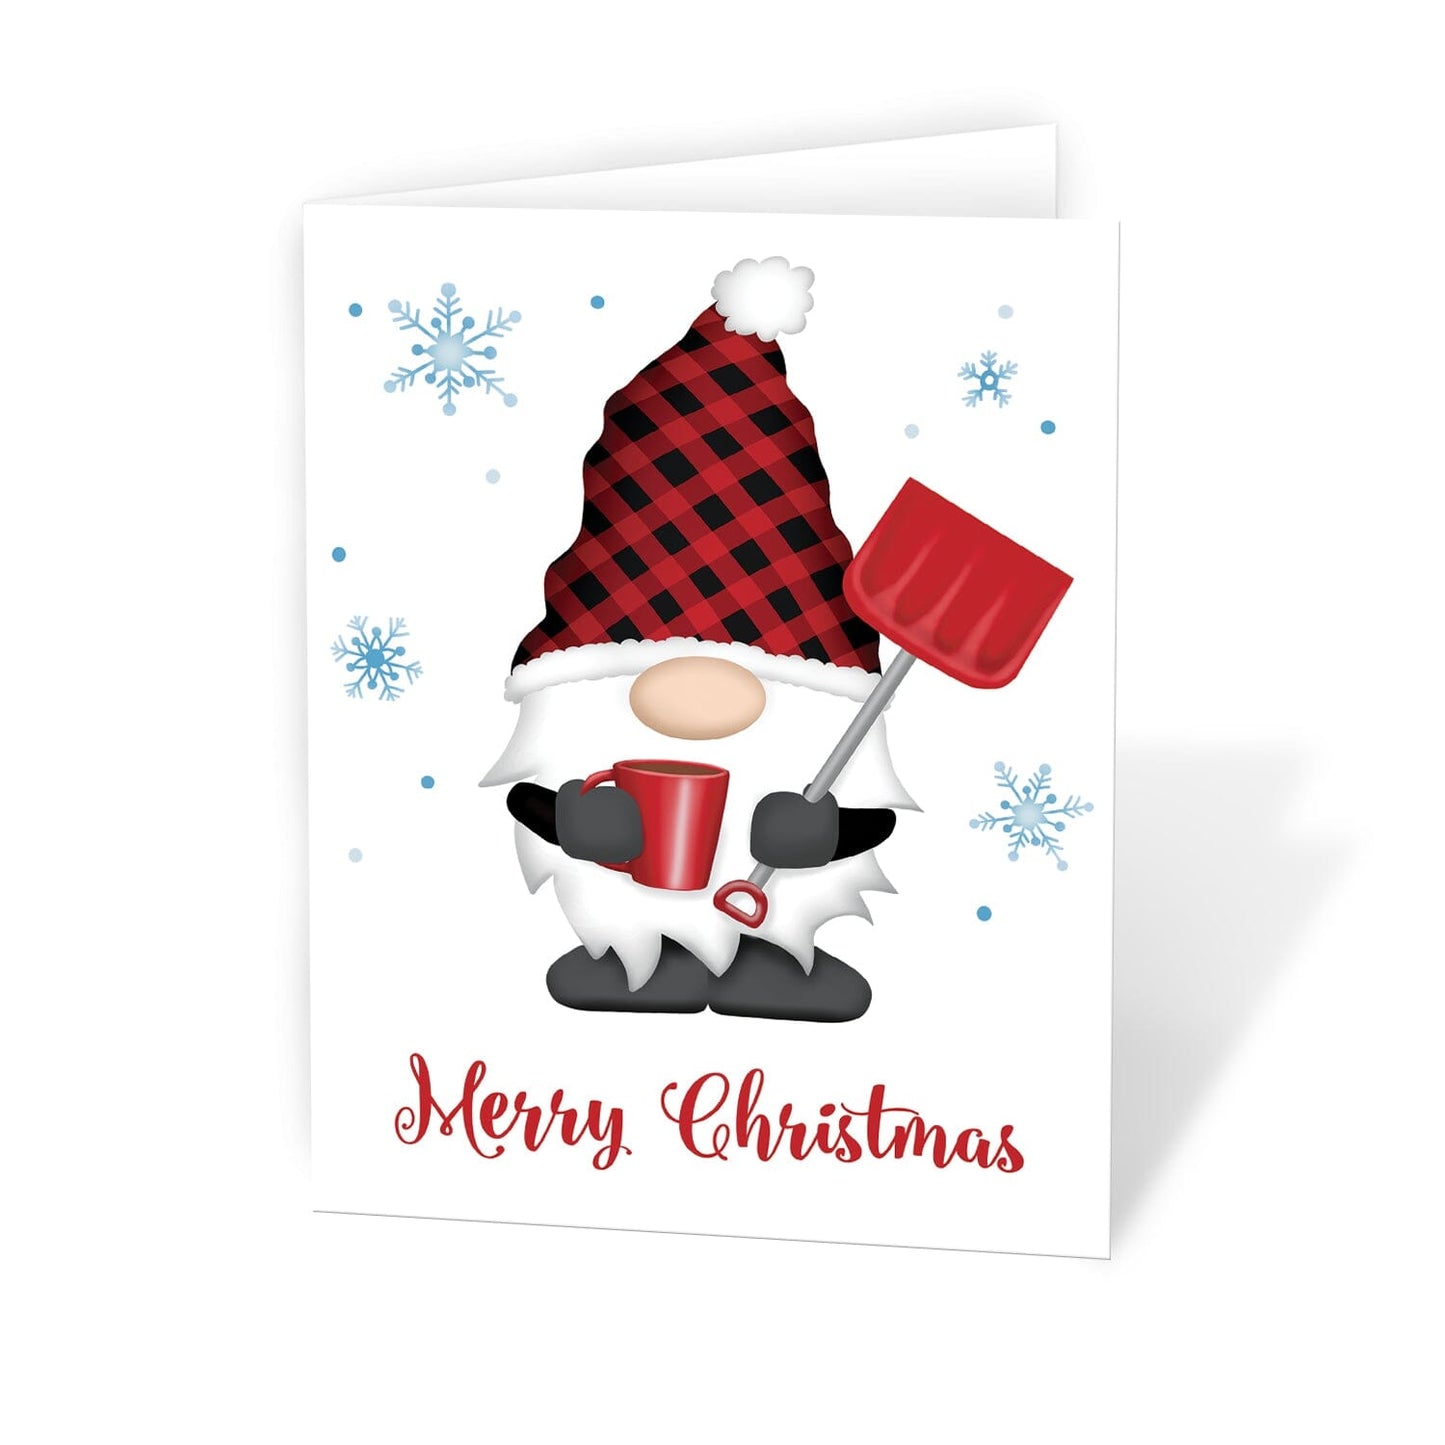 Red Buffalo Plaid Gnome Christmas Cards at Artistically Invited. These cards are designed with an illustration of a winter gnome wearing a black and red buffalo plaid hat, holding a red snow shovel and a hot beverage, and blue snowflakes around it. The front says 'Merry Christmas" in a fun red script font below the adorable gnome.